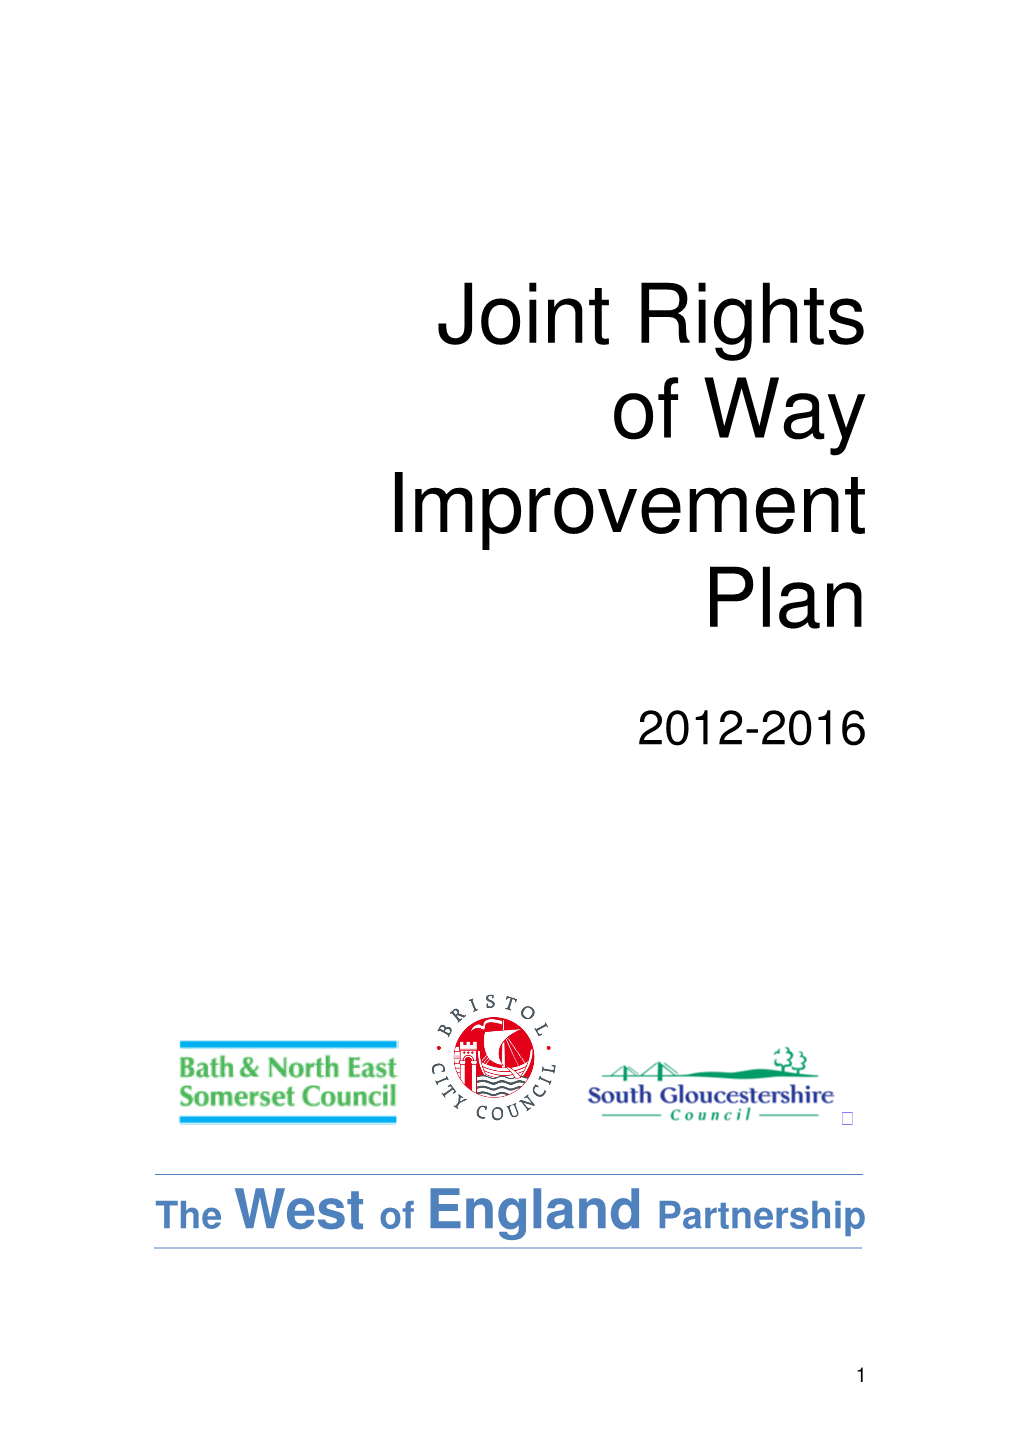 Rights of Way Improvement Plan 2012-2016